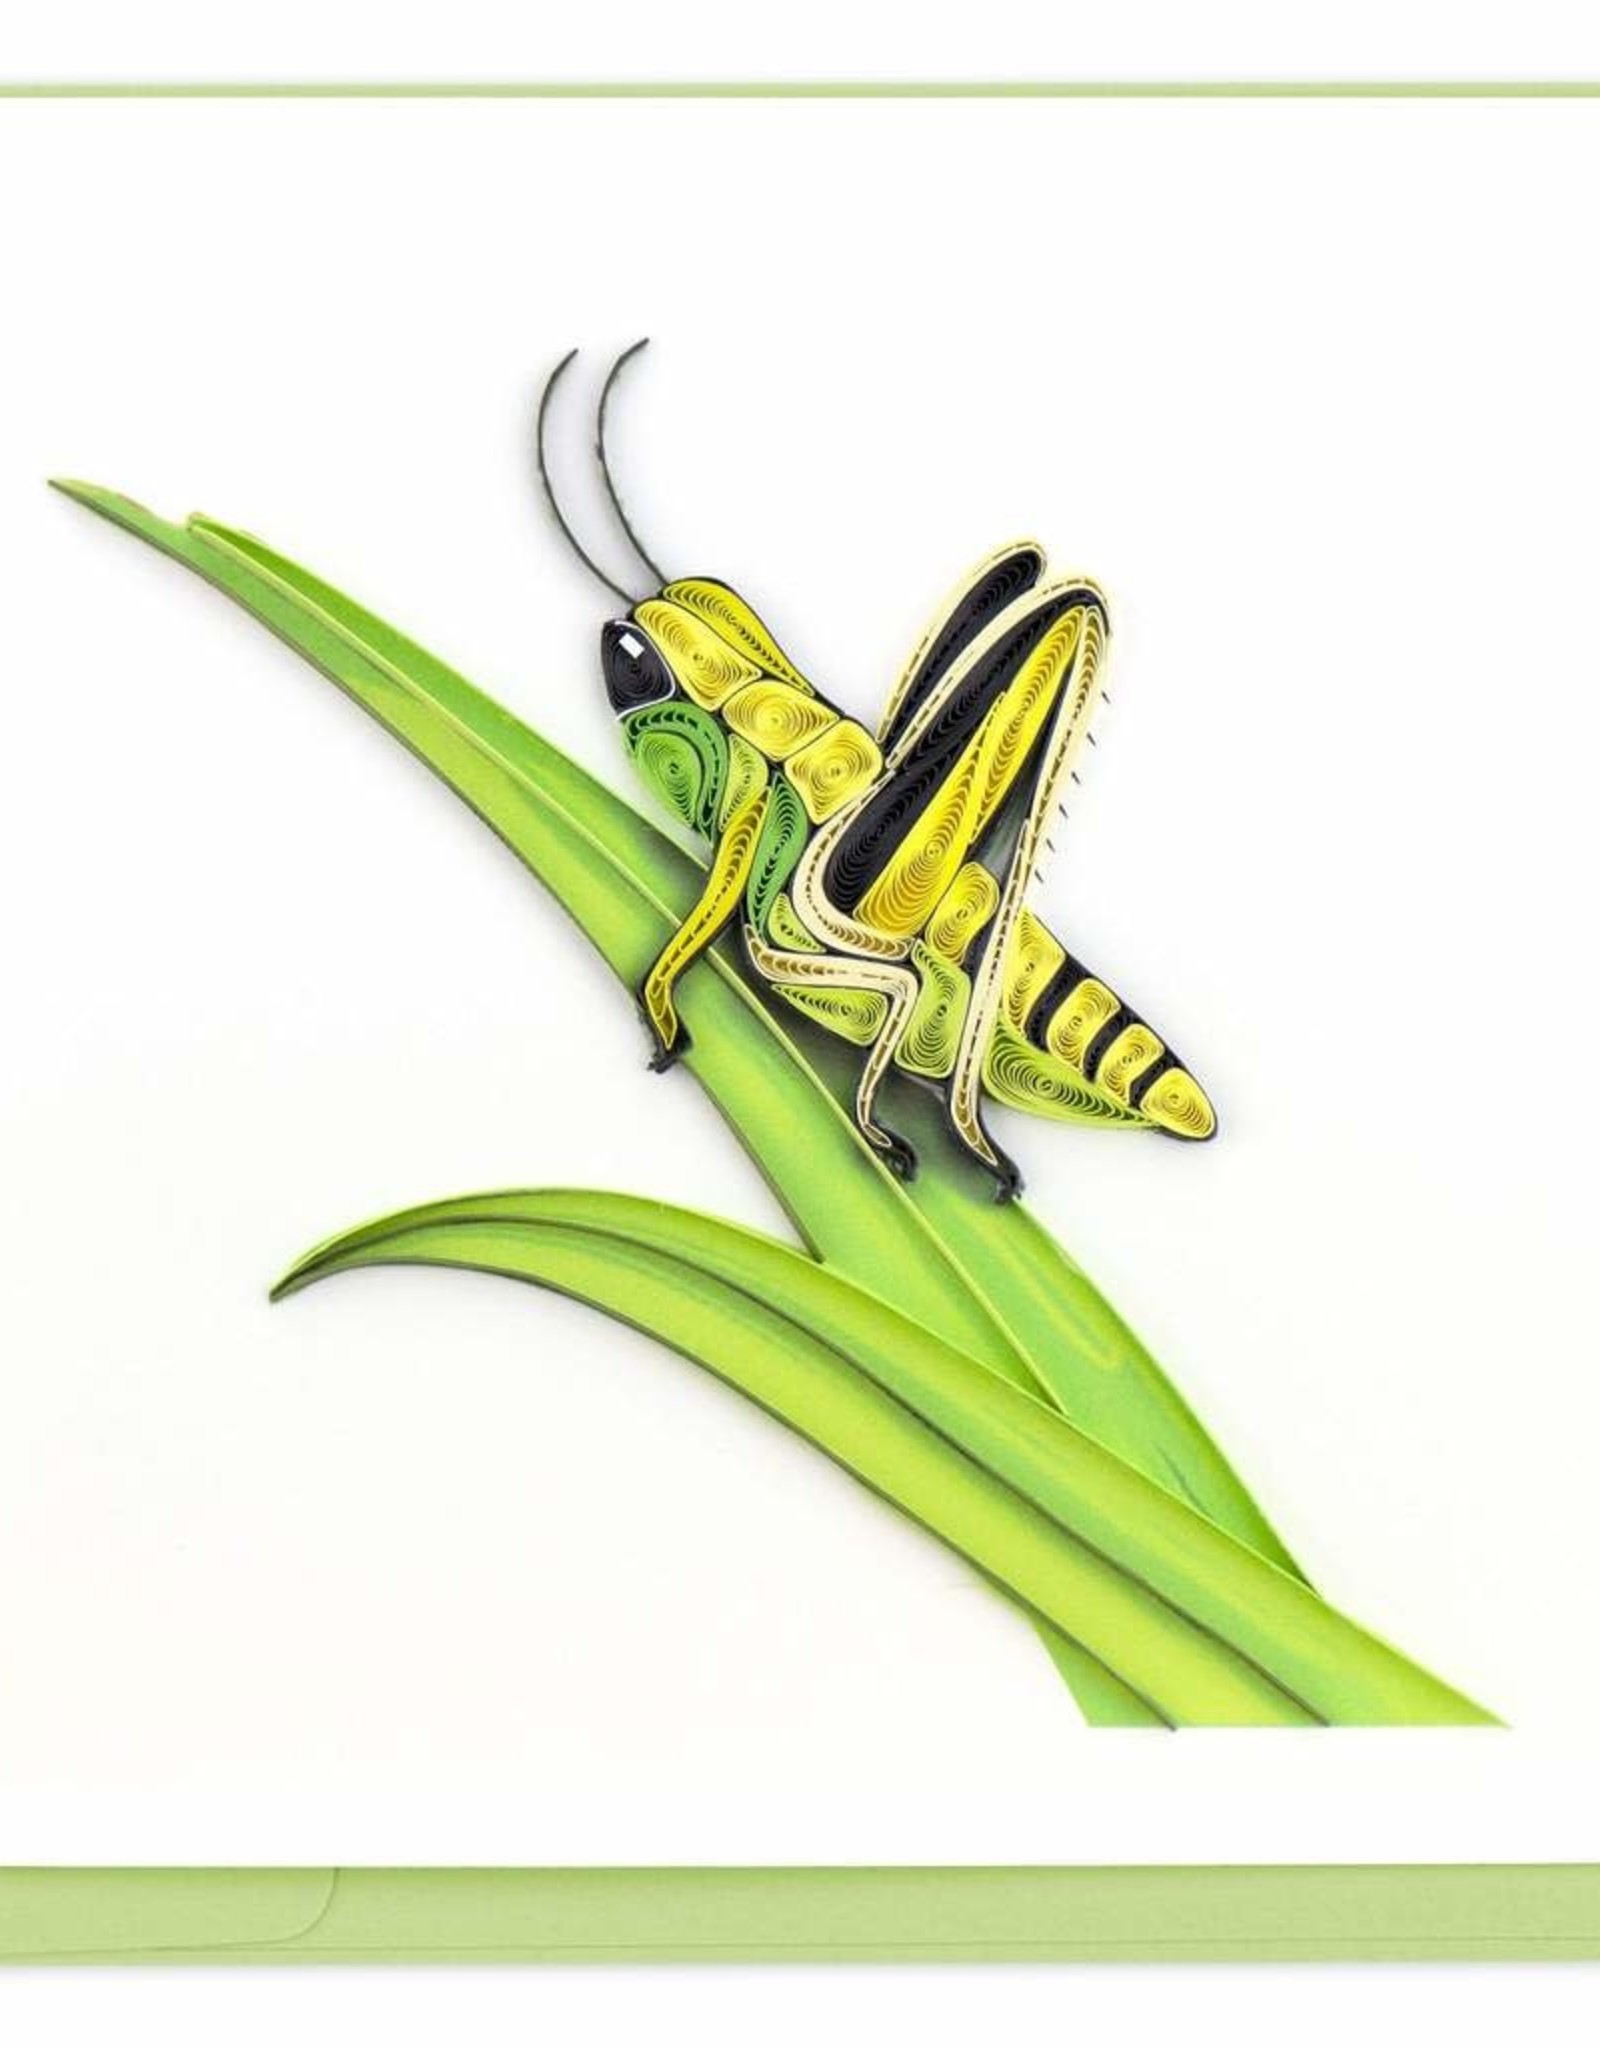 Quilling Card Quilled Grasshopper Greeting Card